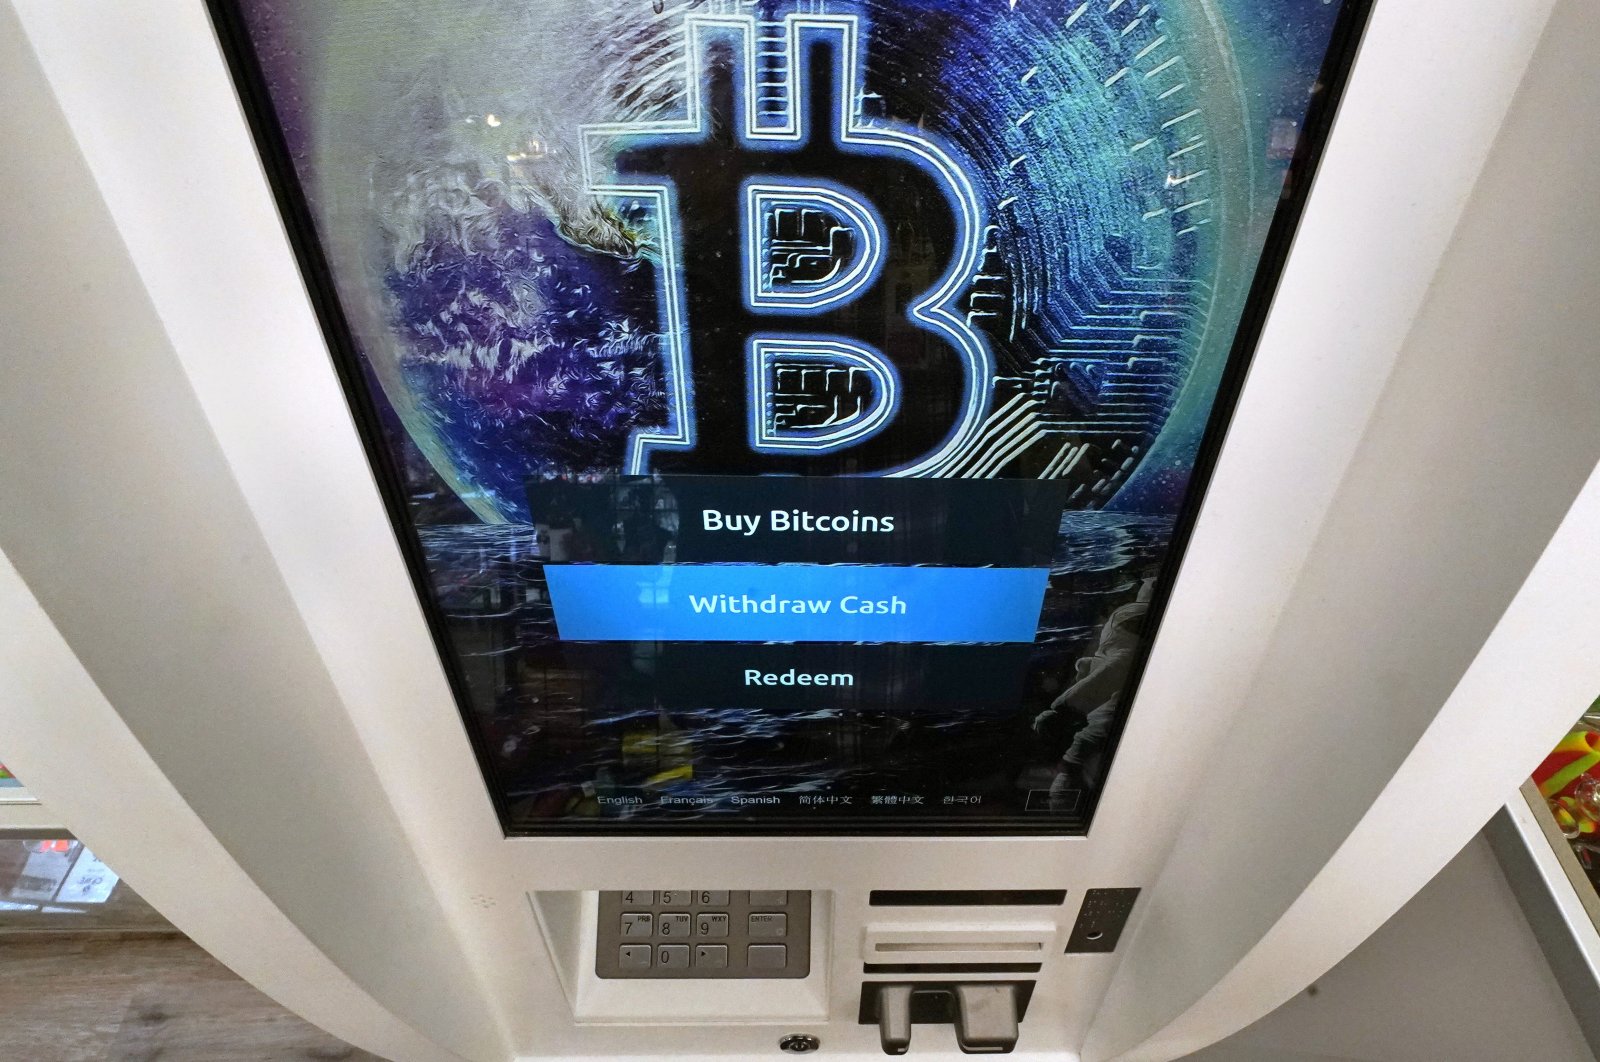 The Bitcoin logo appears on the display screen of a cryptocurrency ATM at the Smoker's Choice store in Salem, New Hampshire, U.S., Feb. 9, 2021. (AP Photo)